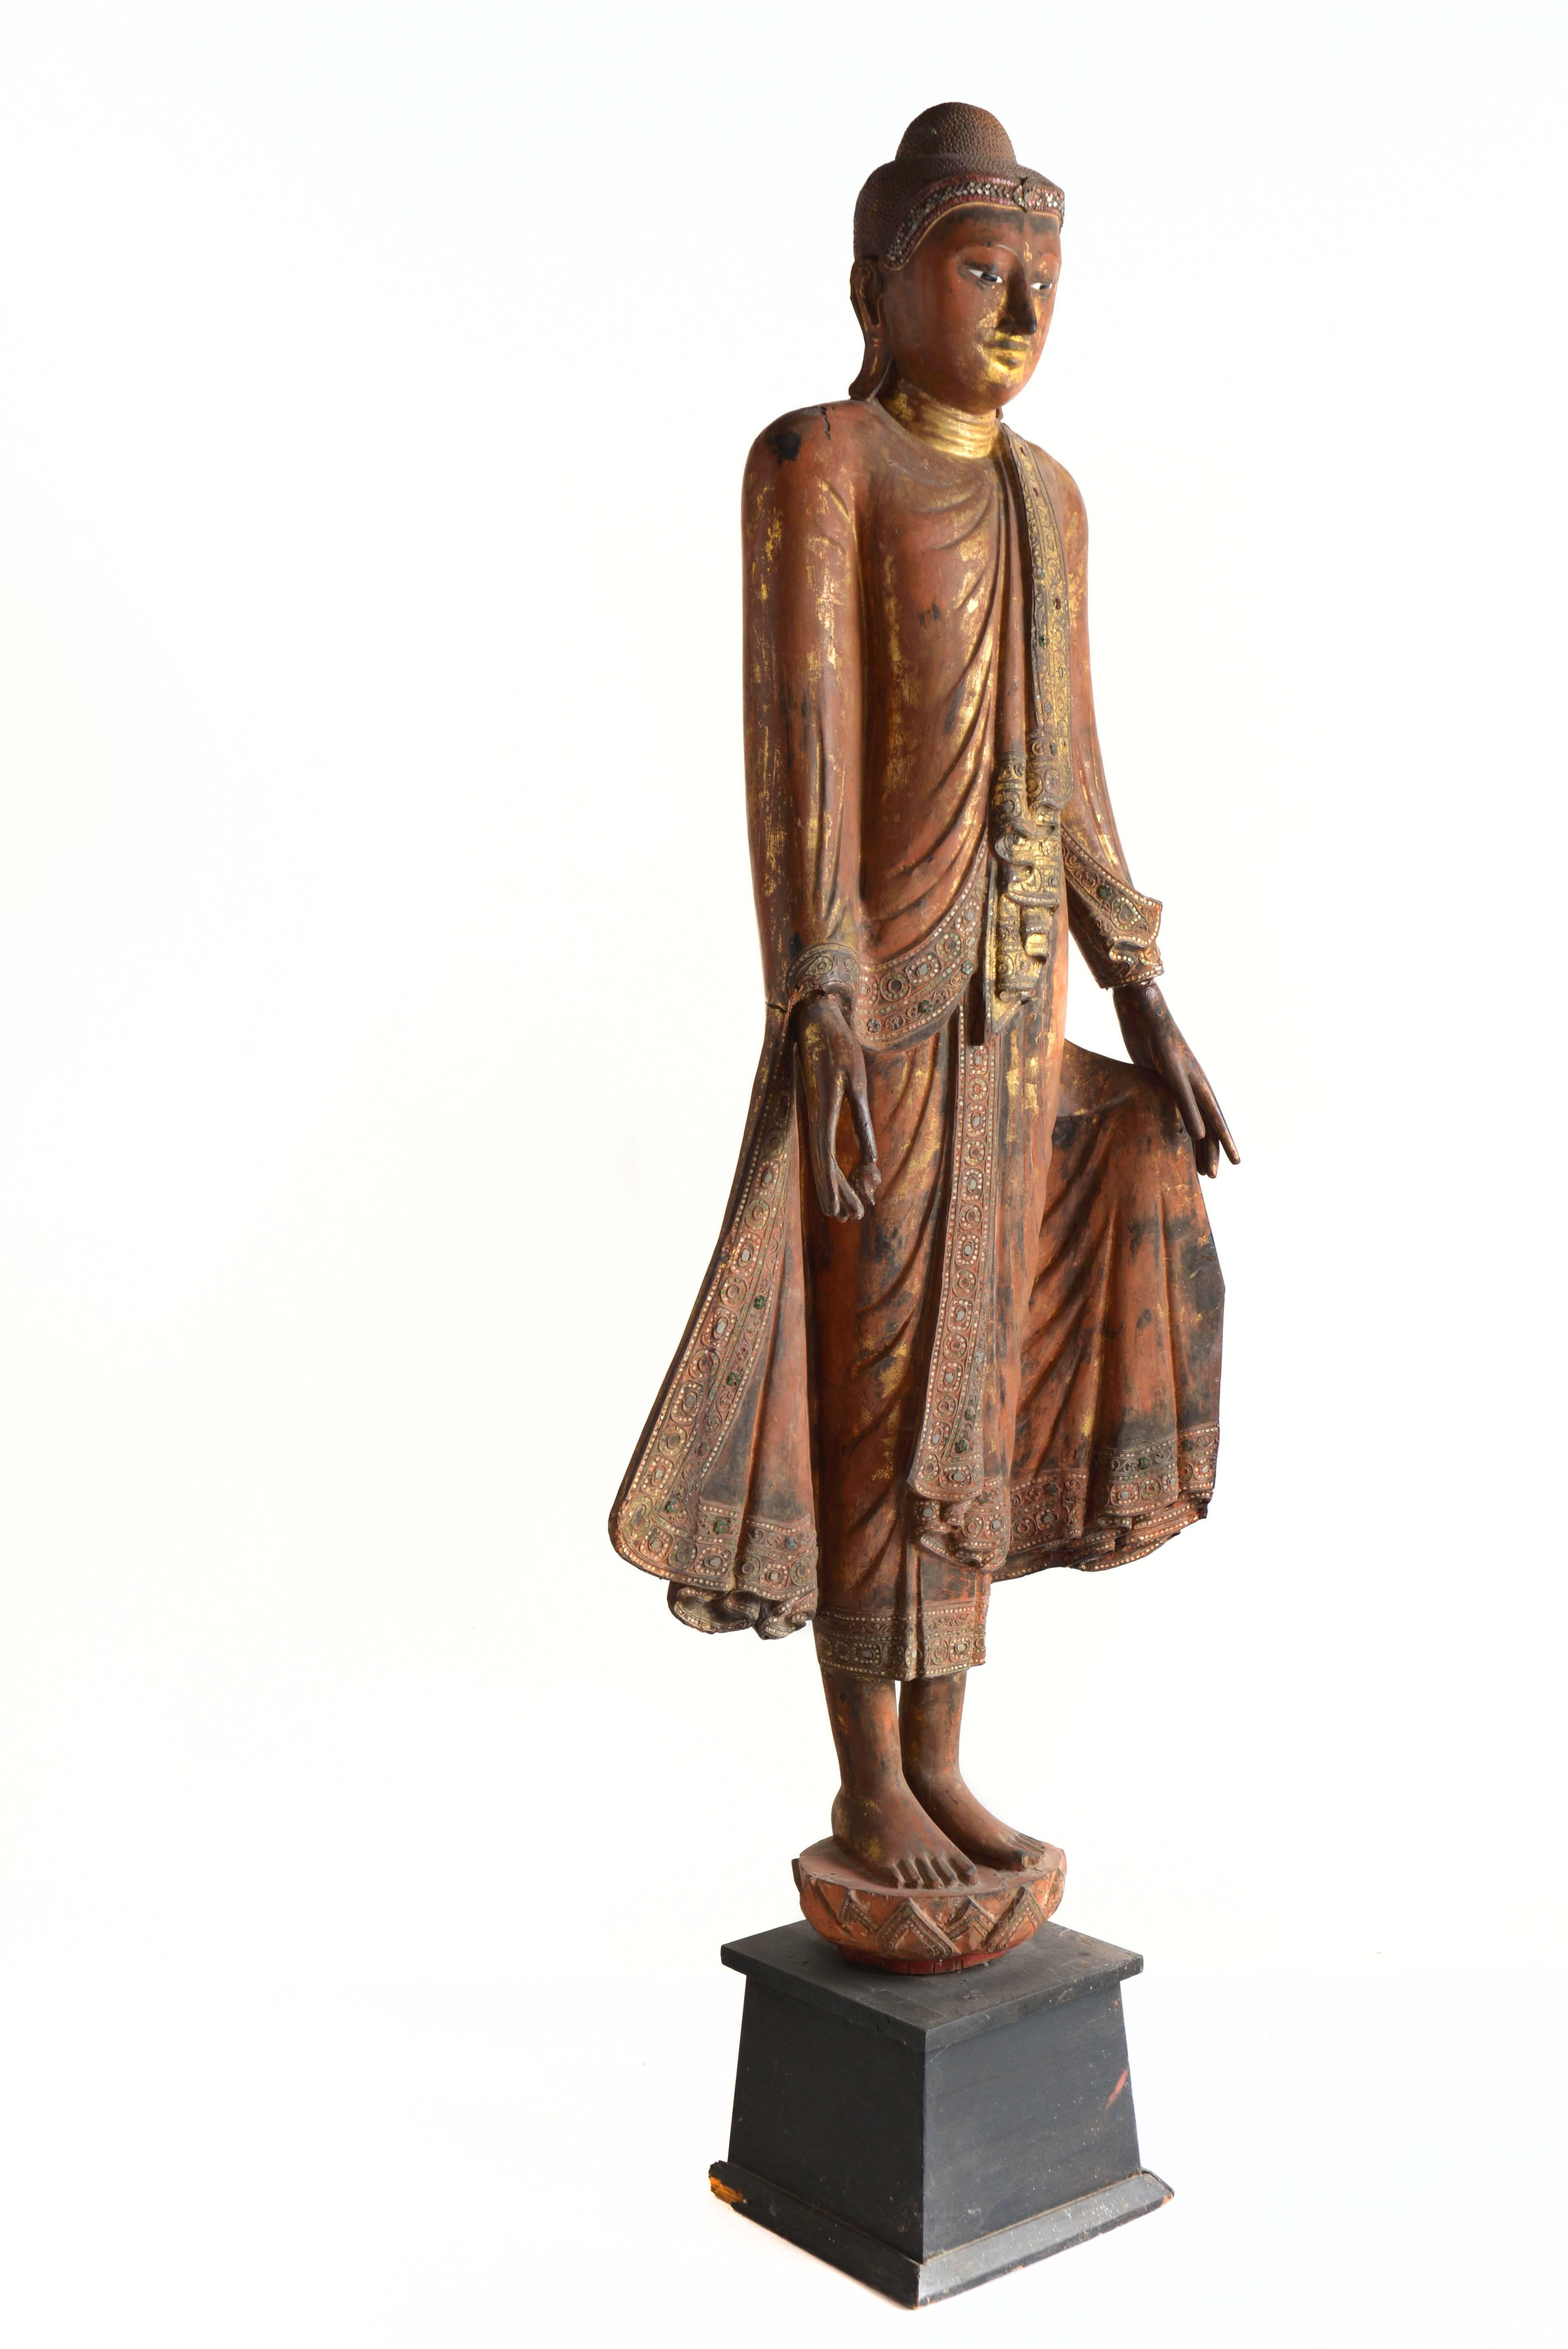 Standing Mandalay Buddha with flowing robes, holds both hands in the Varada gesture symbolizing fulfillment of all wishes, boon and charity. The Buddha's right hand is holding a myloban fruit offering and he stands on a Lotus throne. Wood with